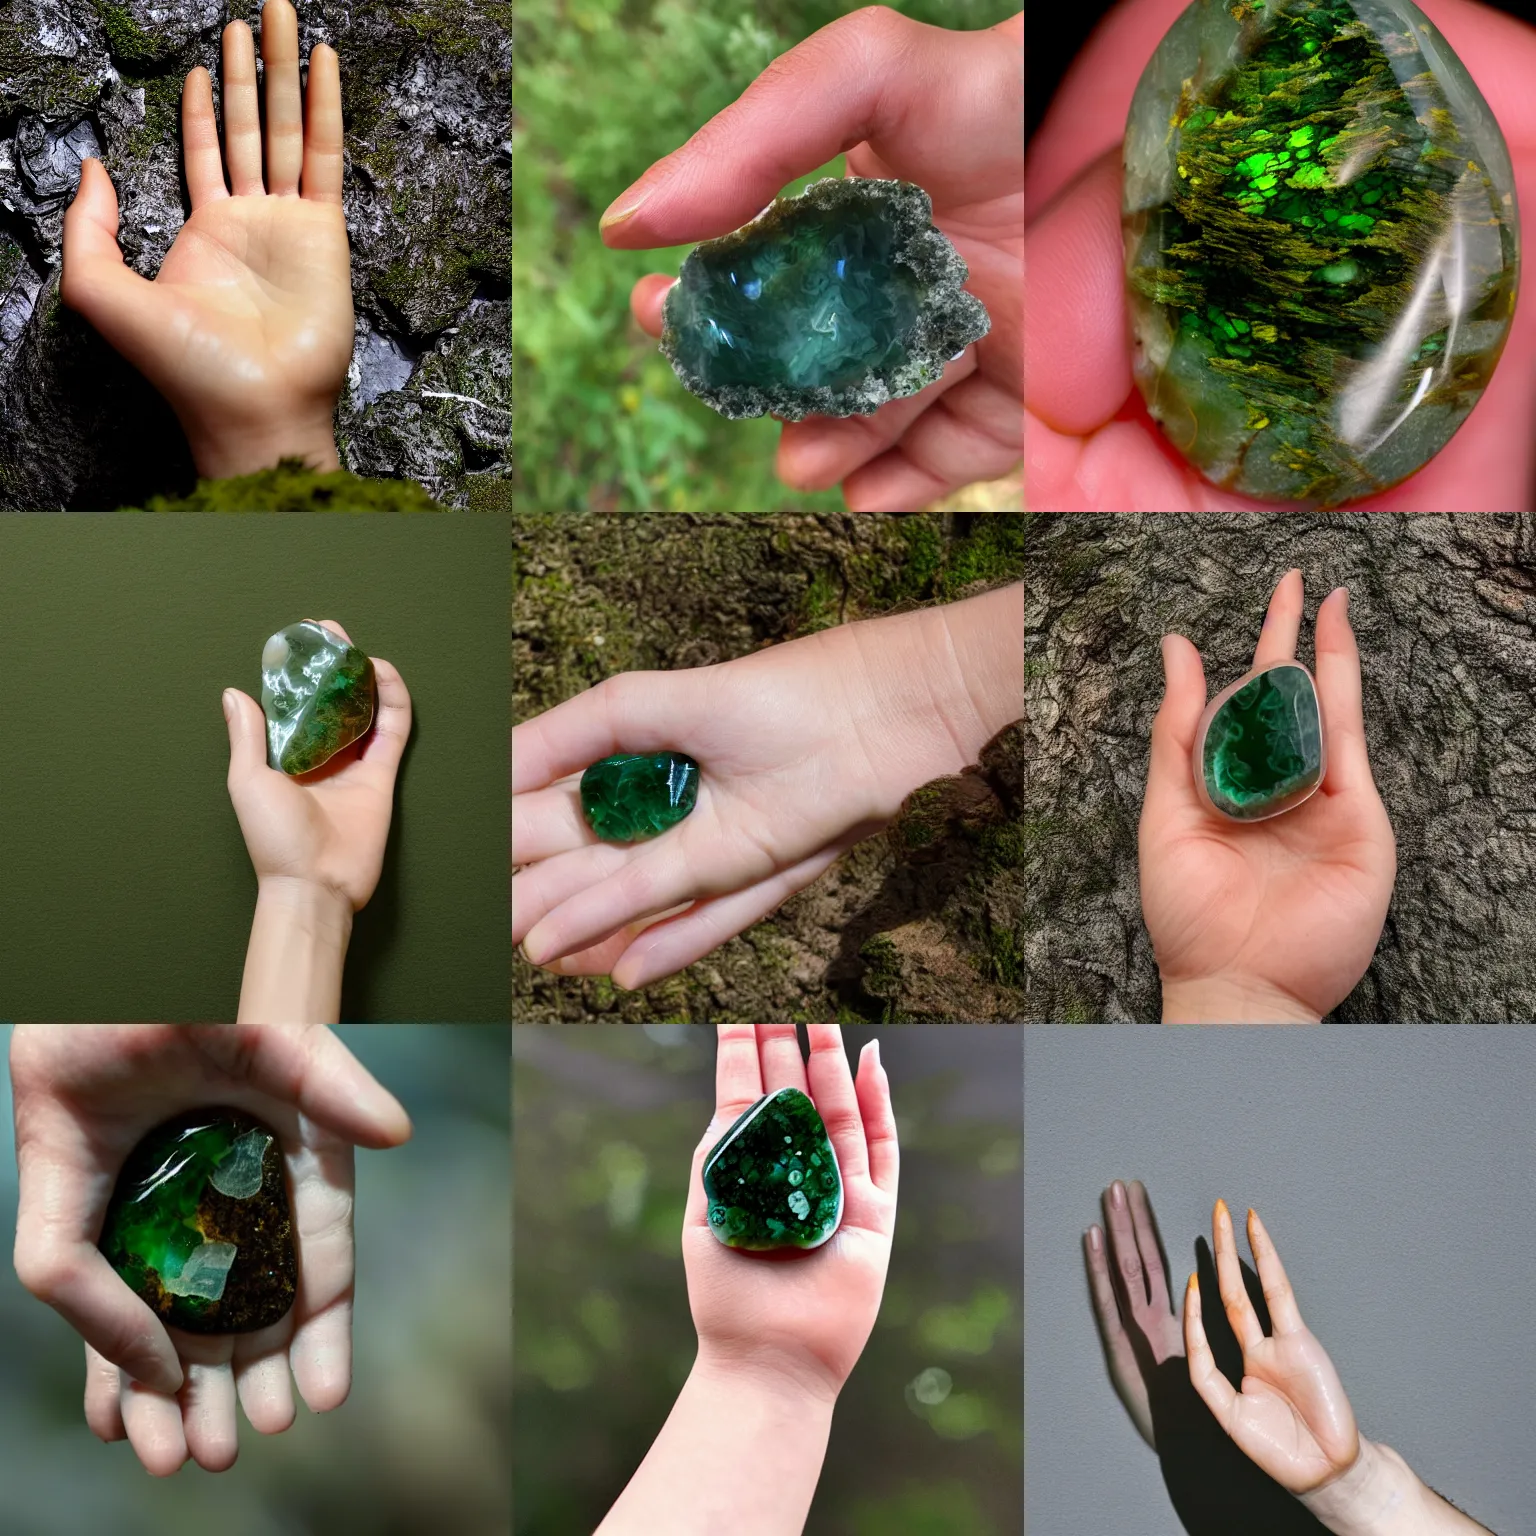 Prompt: hand photography, discernible hand with thumb and four fingers, holding a moss agate